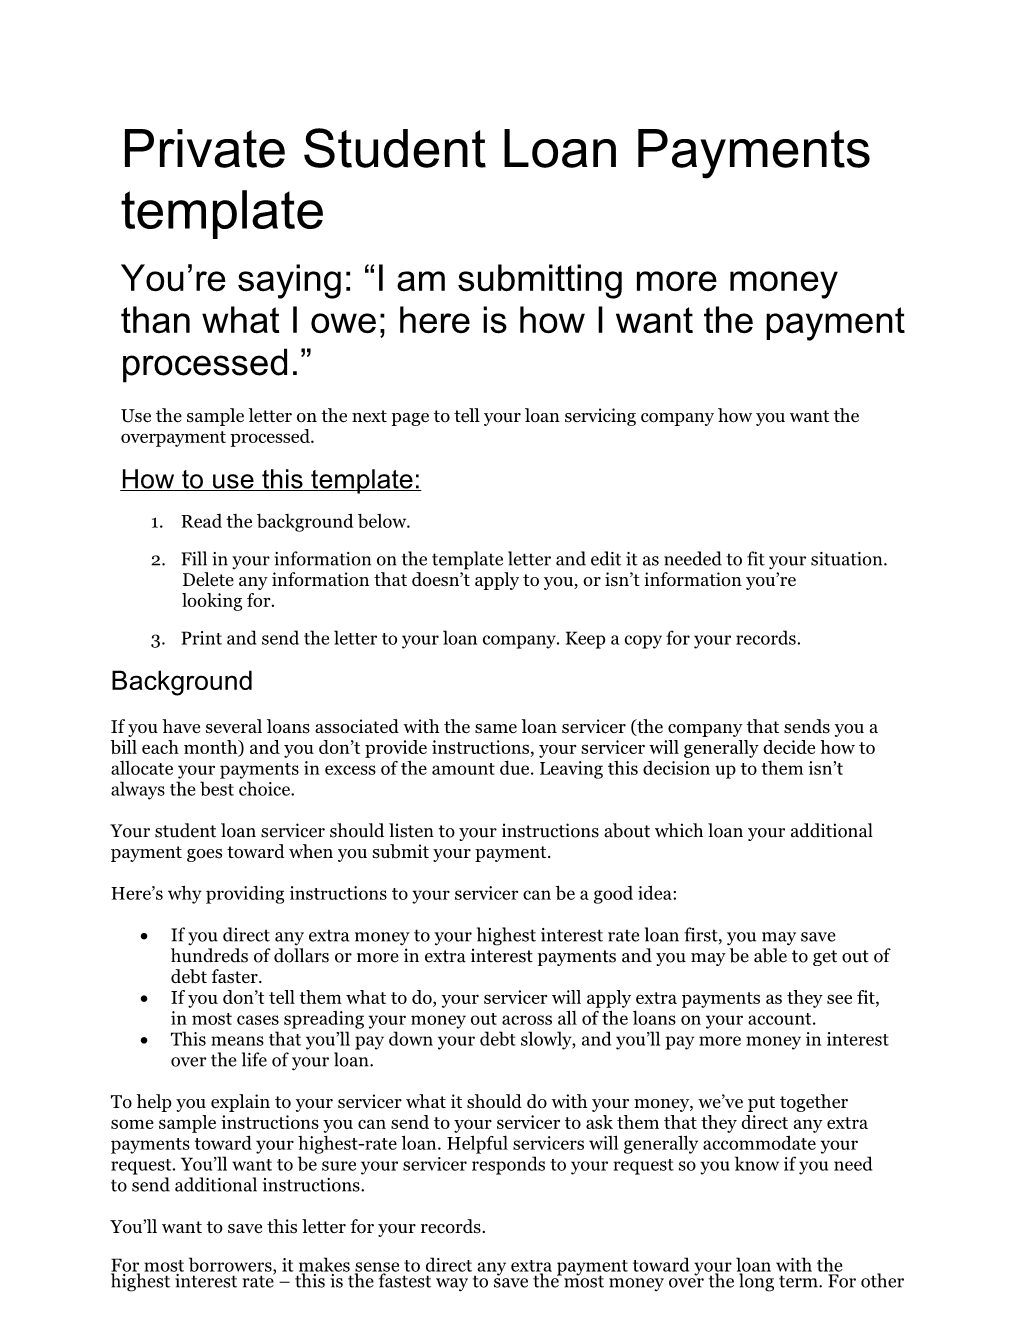 Private Student Loan Paymentstemplate